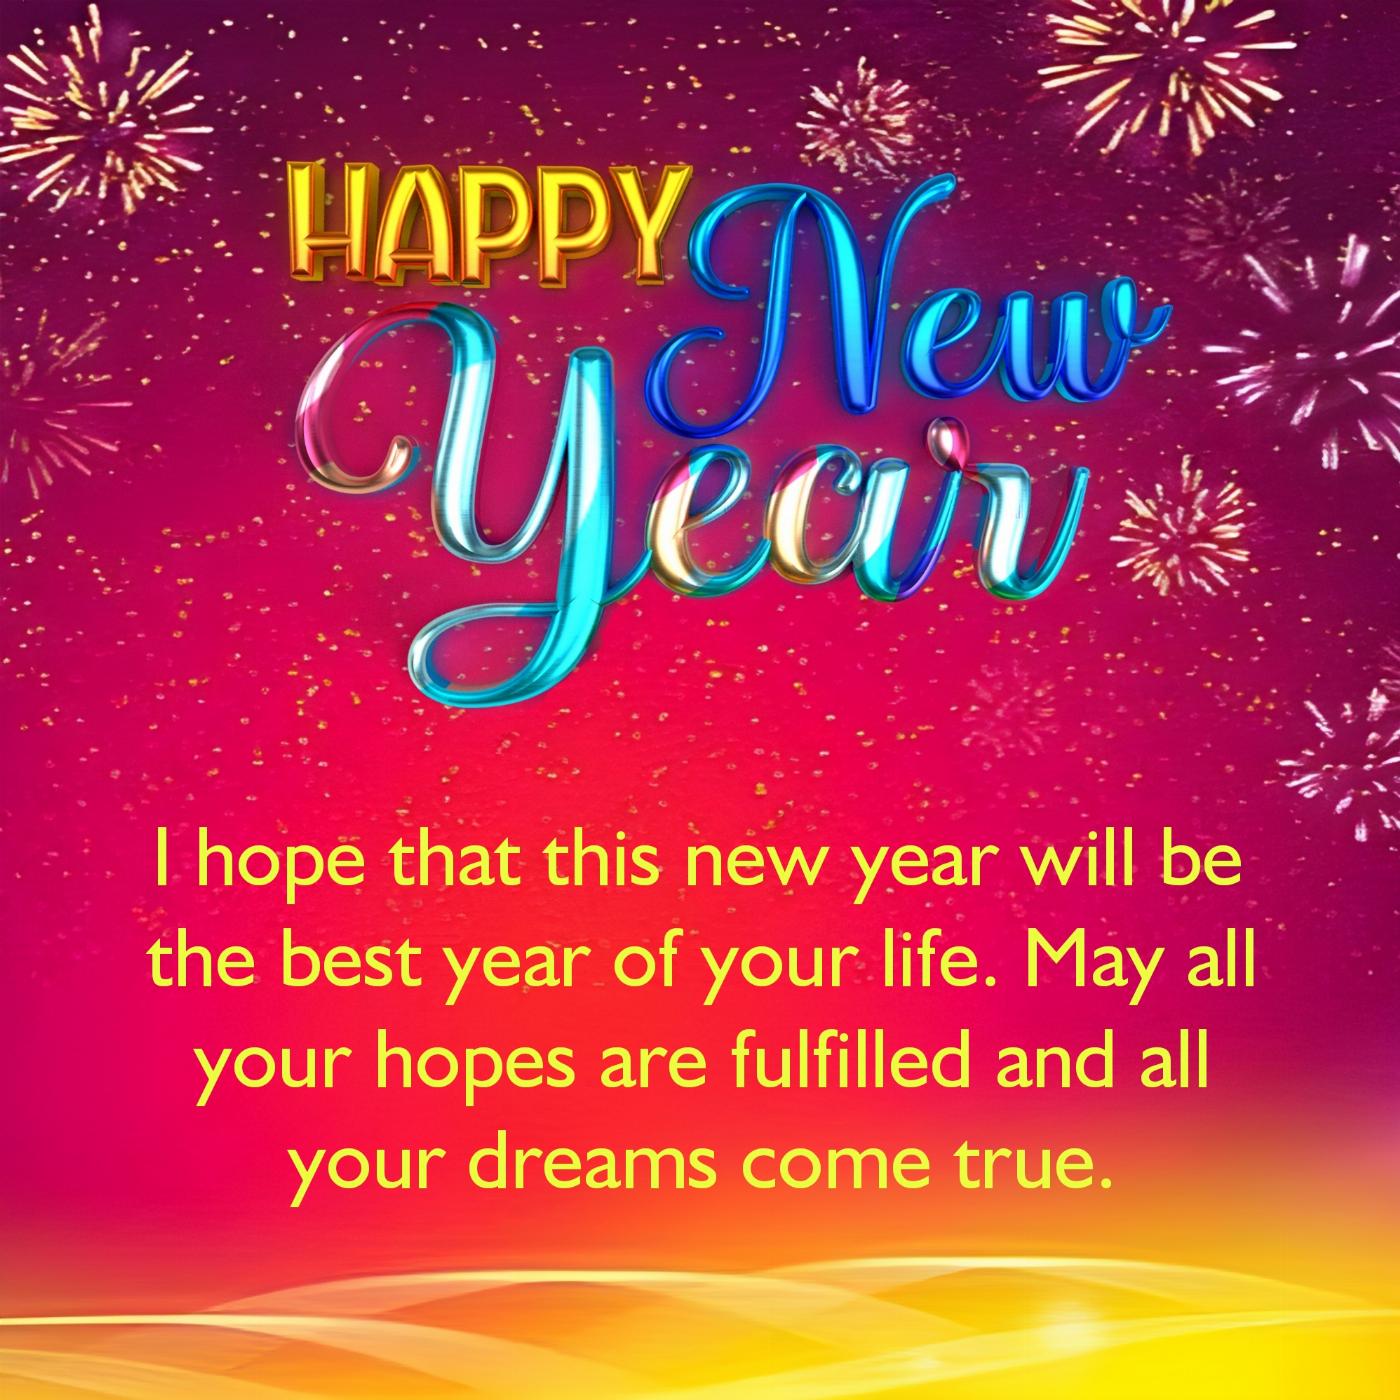 I hope that this new year will be the best year of your life